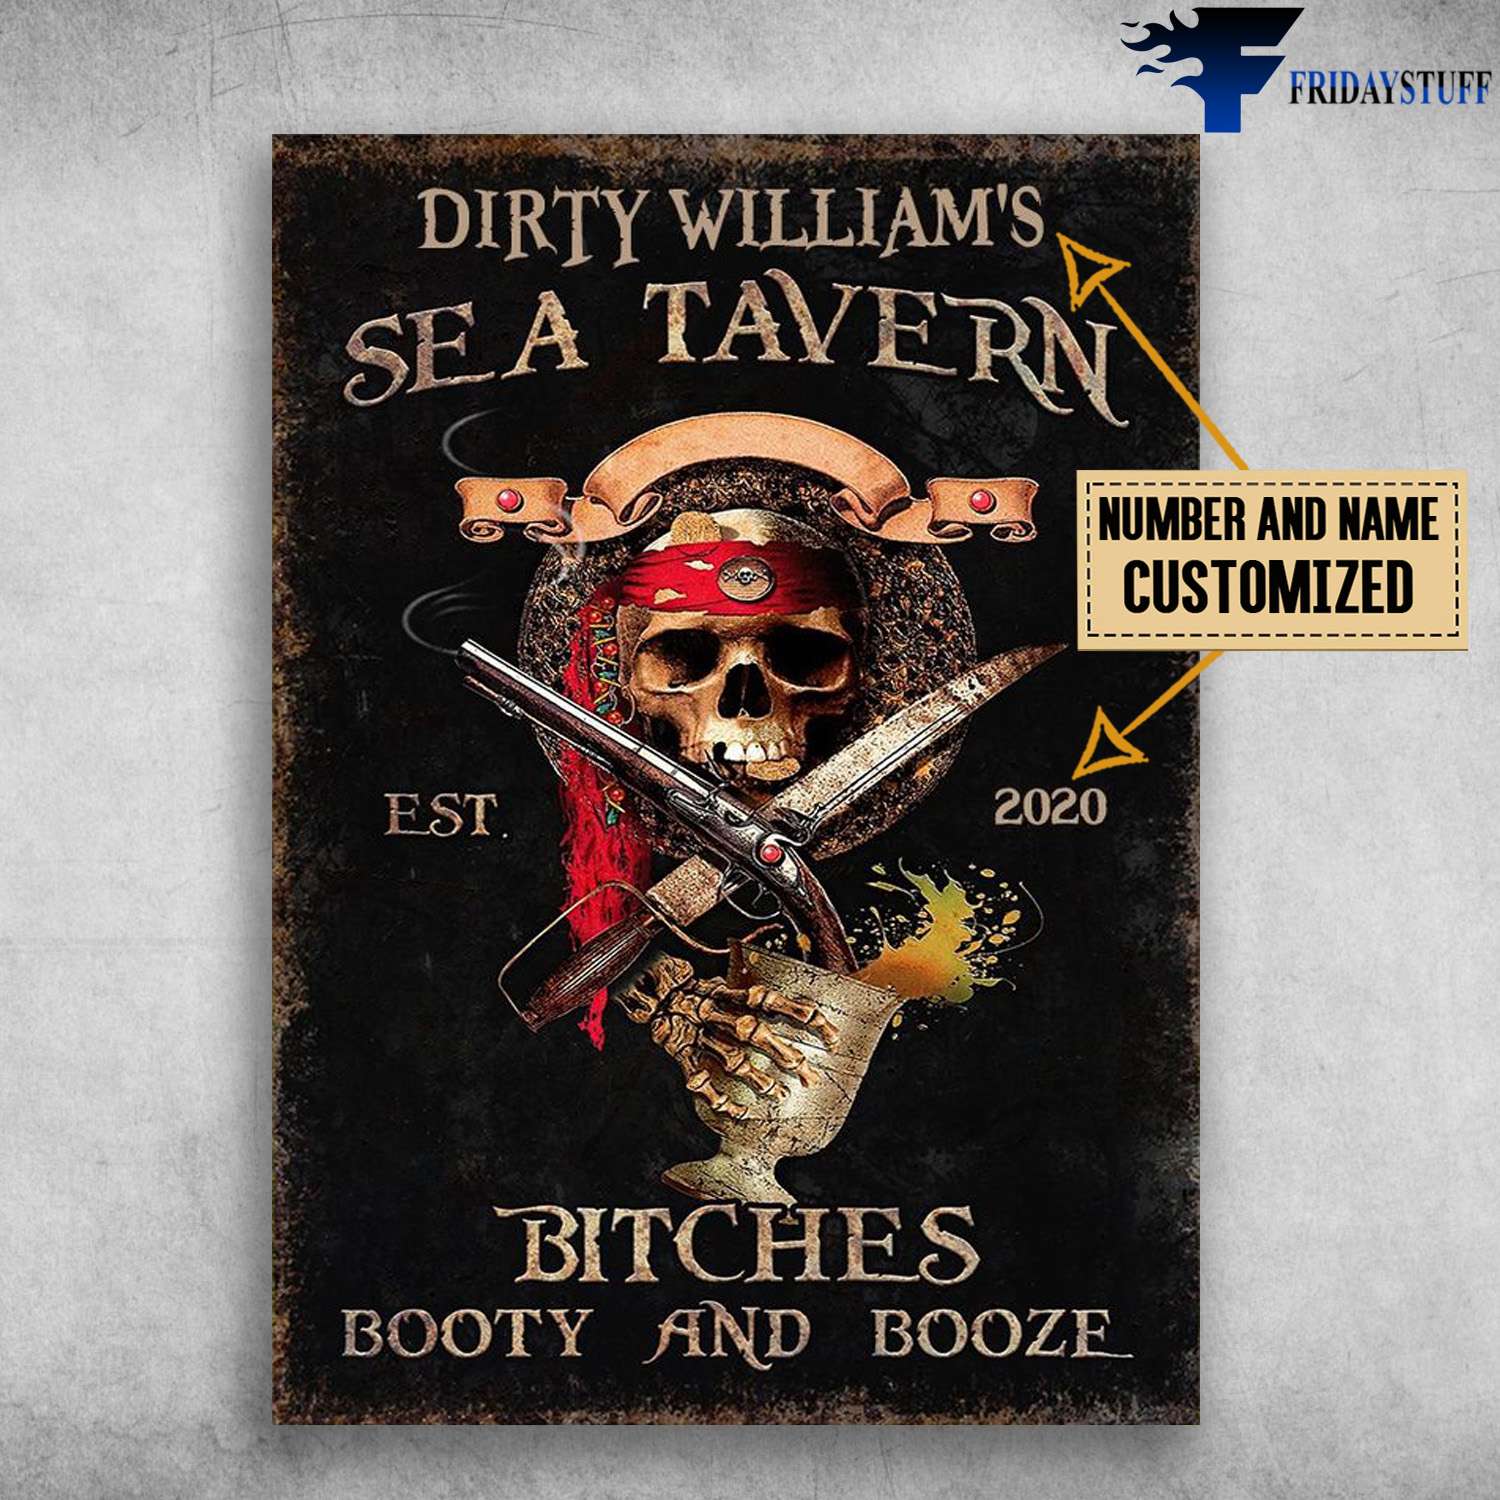 Pirate King, Pirate Skull, Sea Tavern, Bitches Booty And Booze